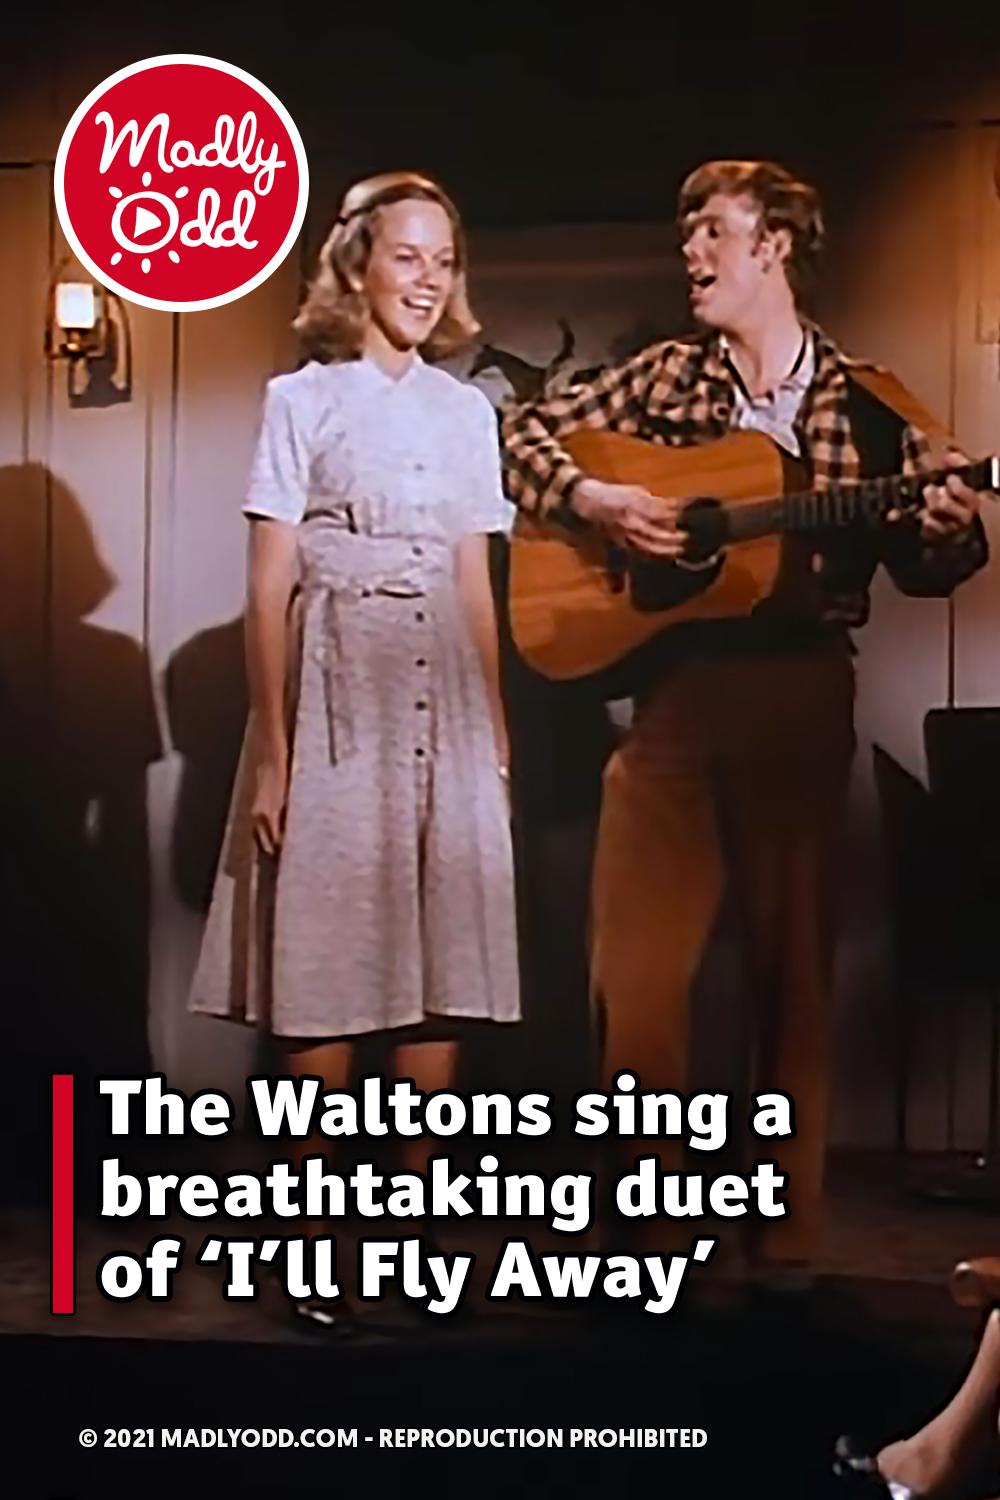 The Waltons sing a breathtaking duet of ‘I’ll Fly Away’